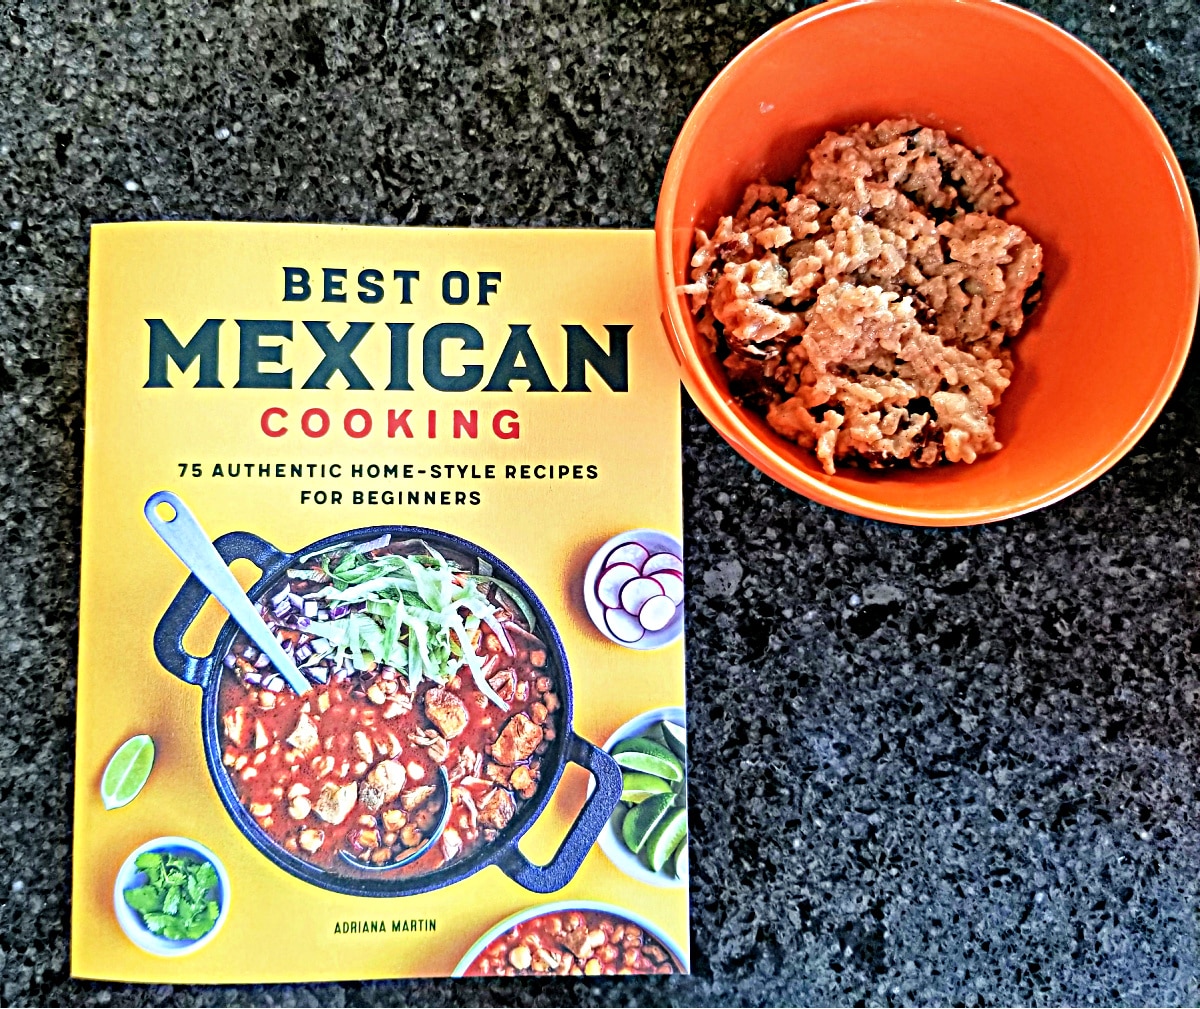 Mexican Rice Pudding from Best of Mexican Cooking by Adriana Martin